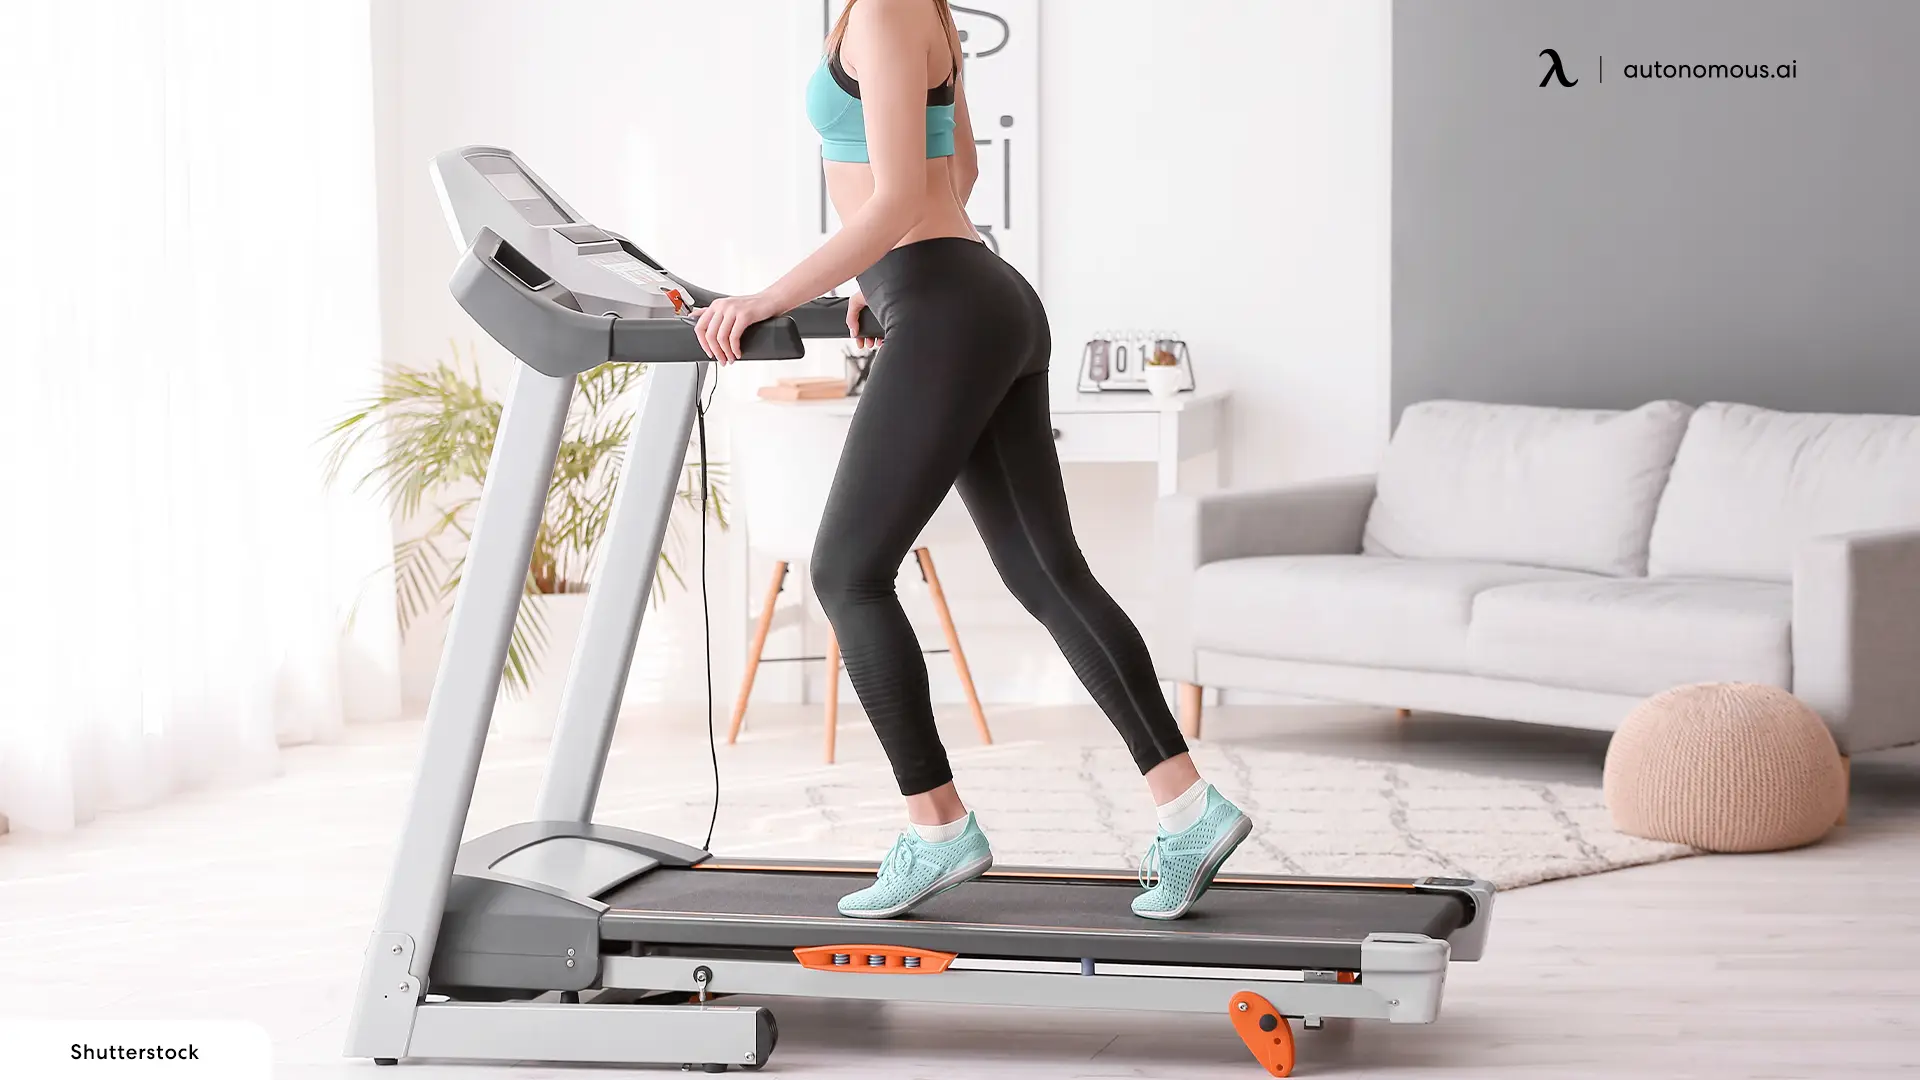 Uphill Interval Treadmill Workout